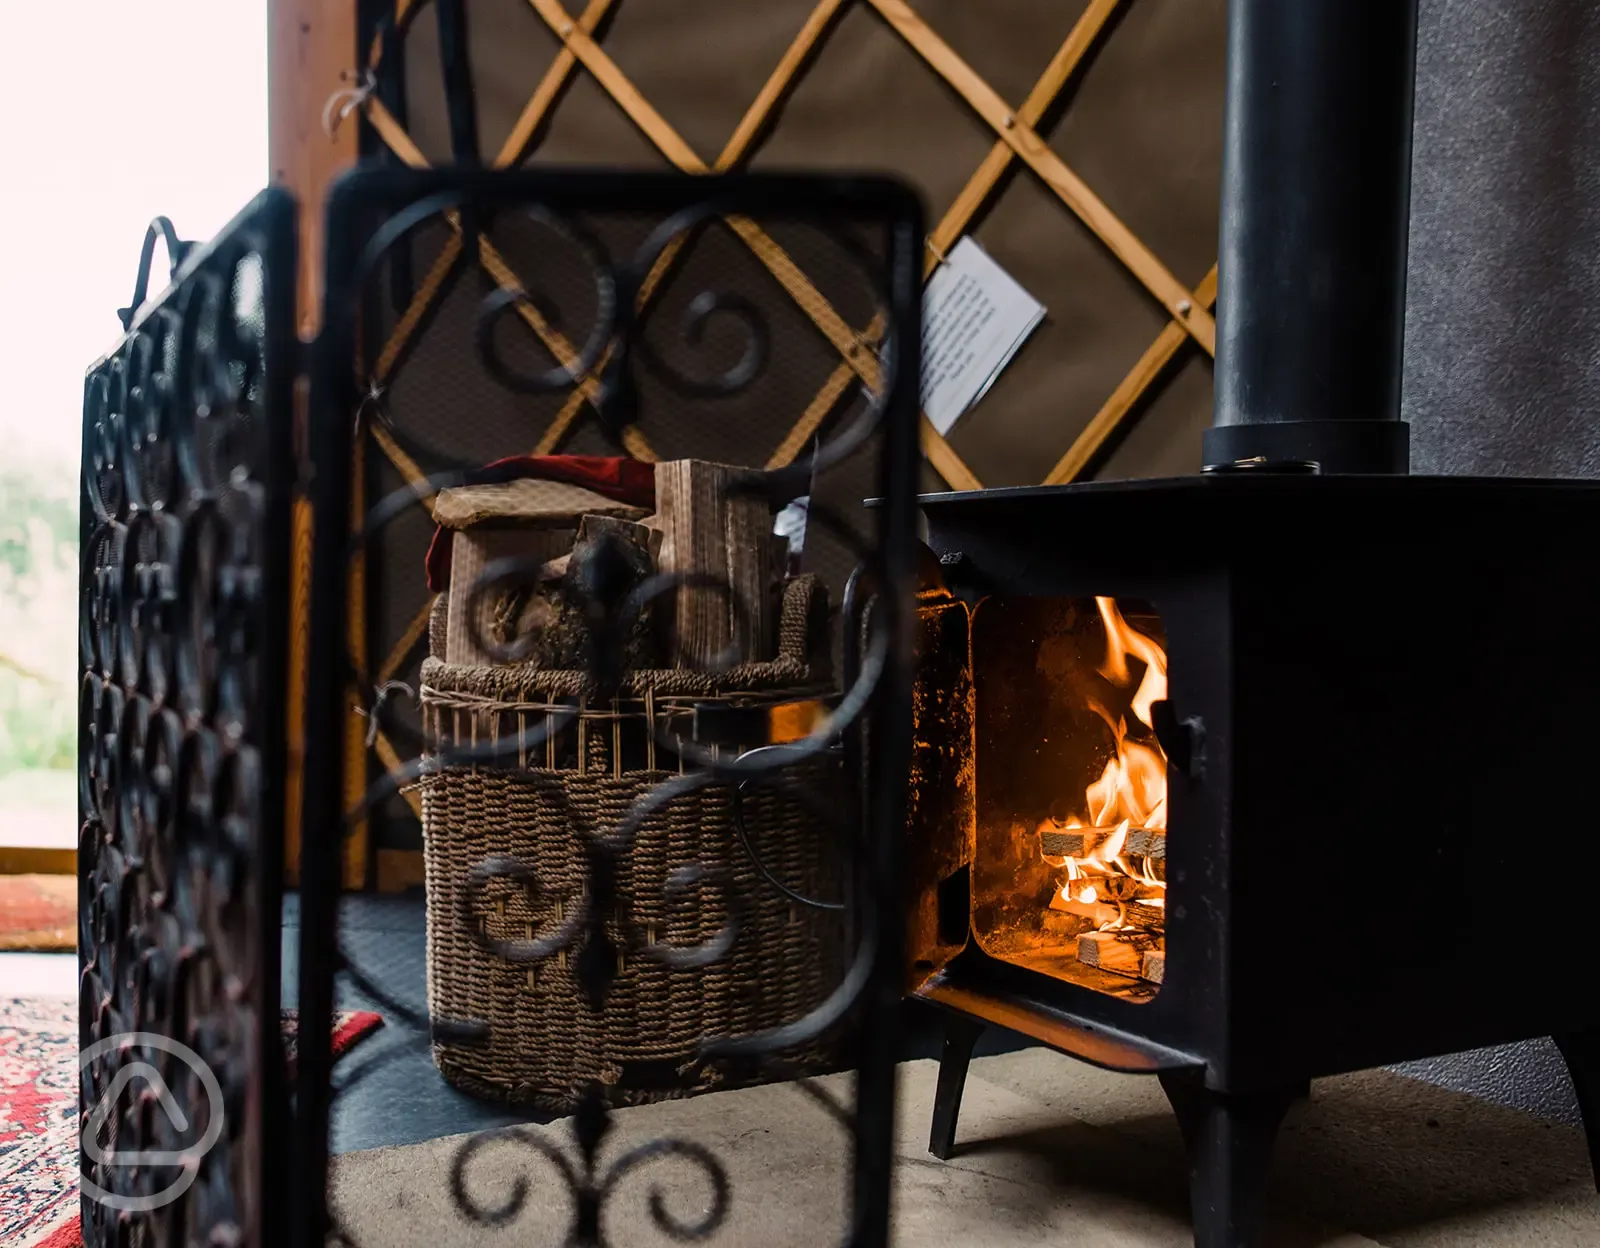 A woodburner to keep your yurt warm and cosy